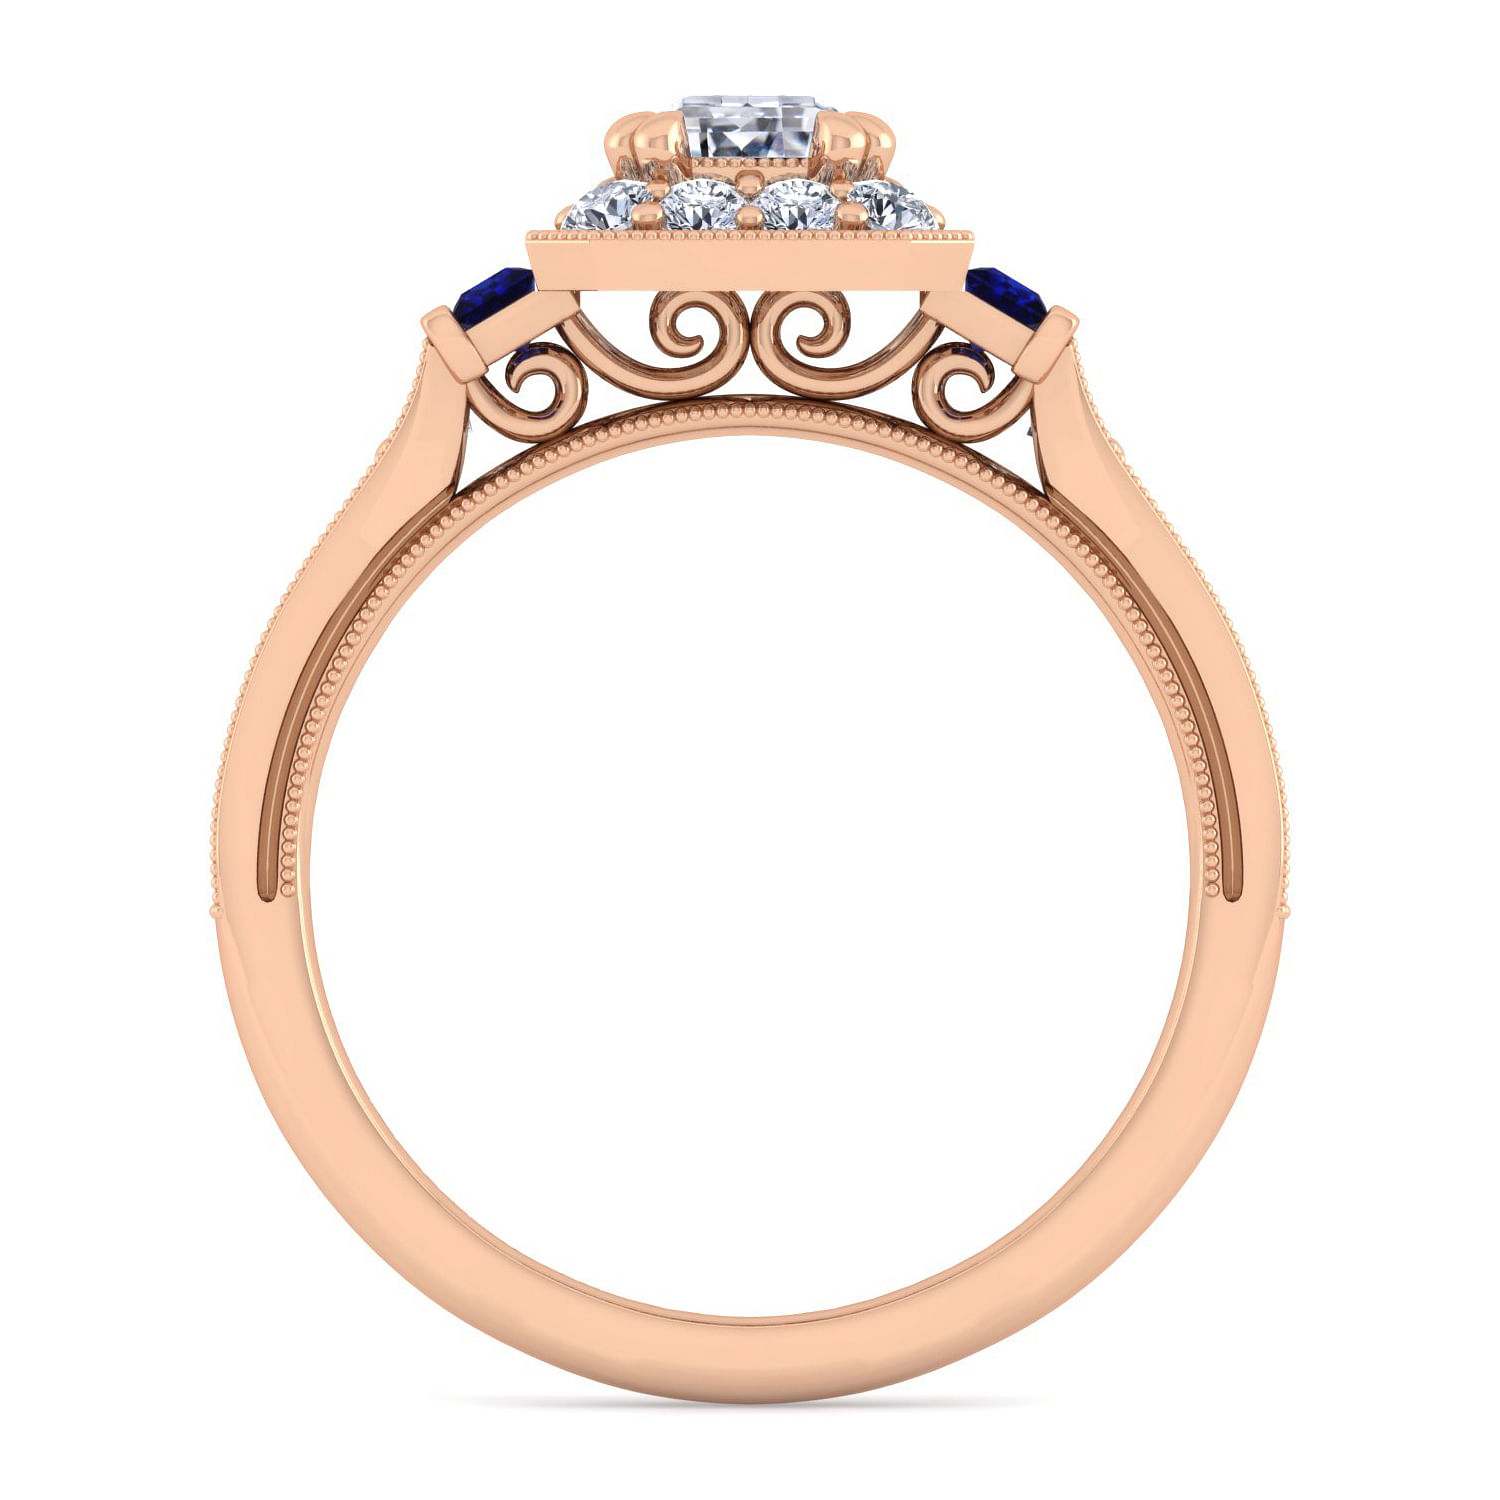 Vintage Inspired 14K Rose Gold Halo Emerald Cut Diamond and Sapphire Engagement Ring